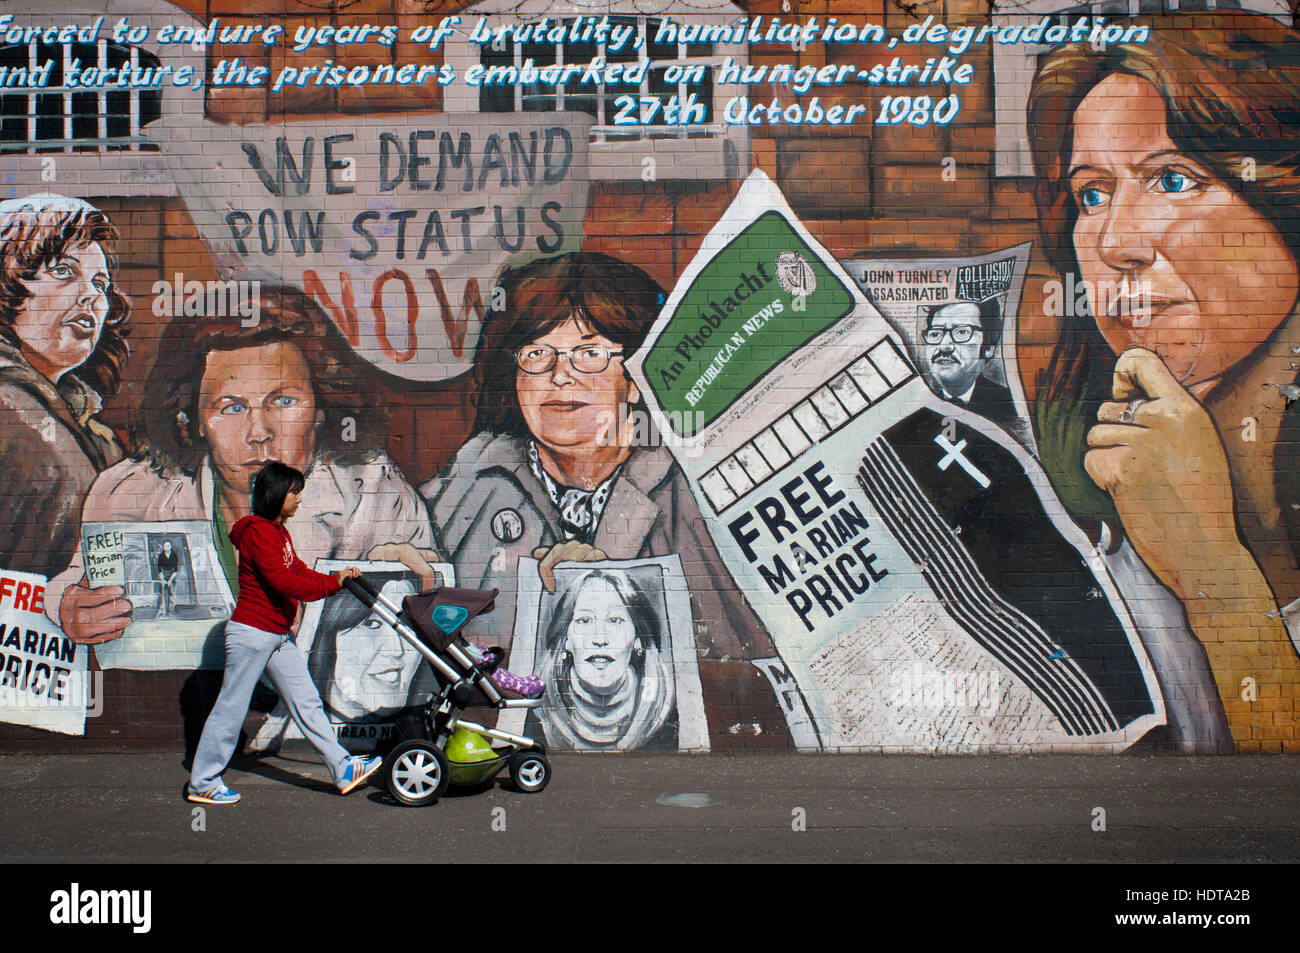 Free Marian Price wall in Falls road street, Belfast, Northern Ireland, UK. We Demand POW Status Now. 'Forced to endure years of brutality, humiliatio Stock Photo